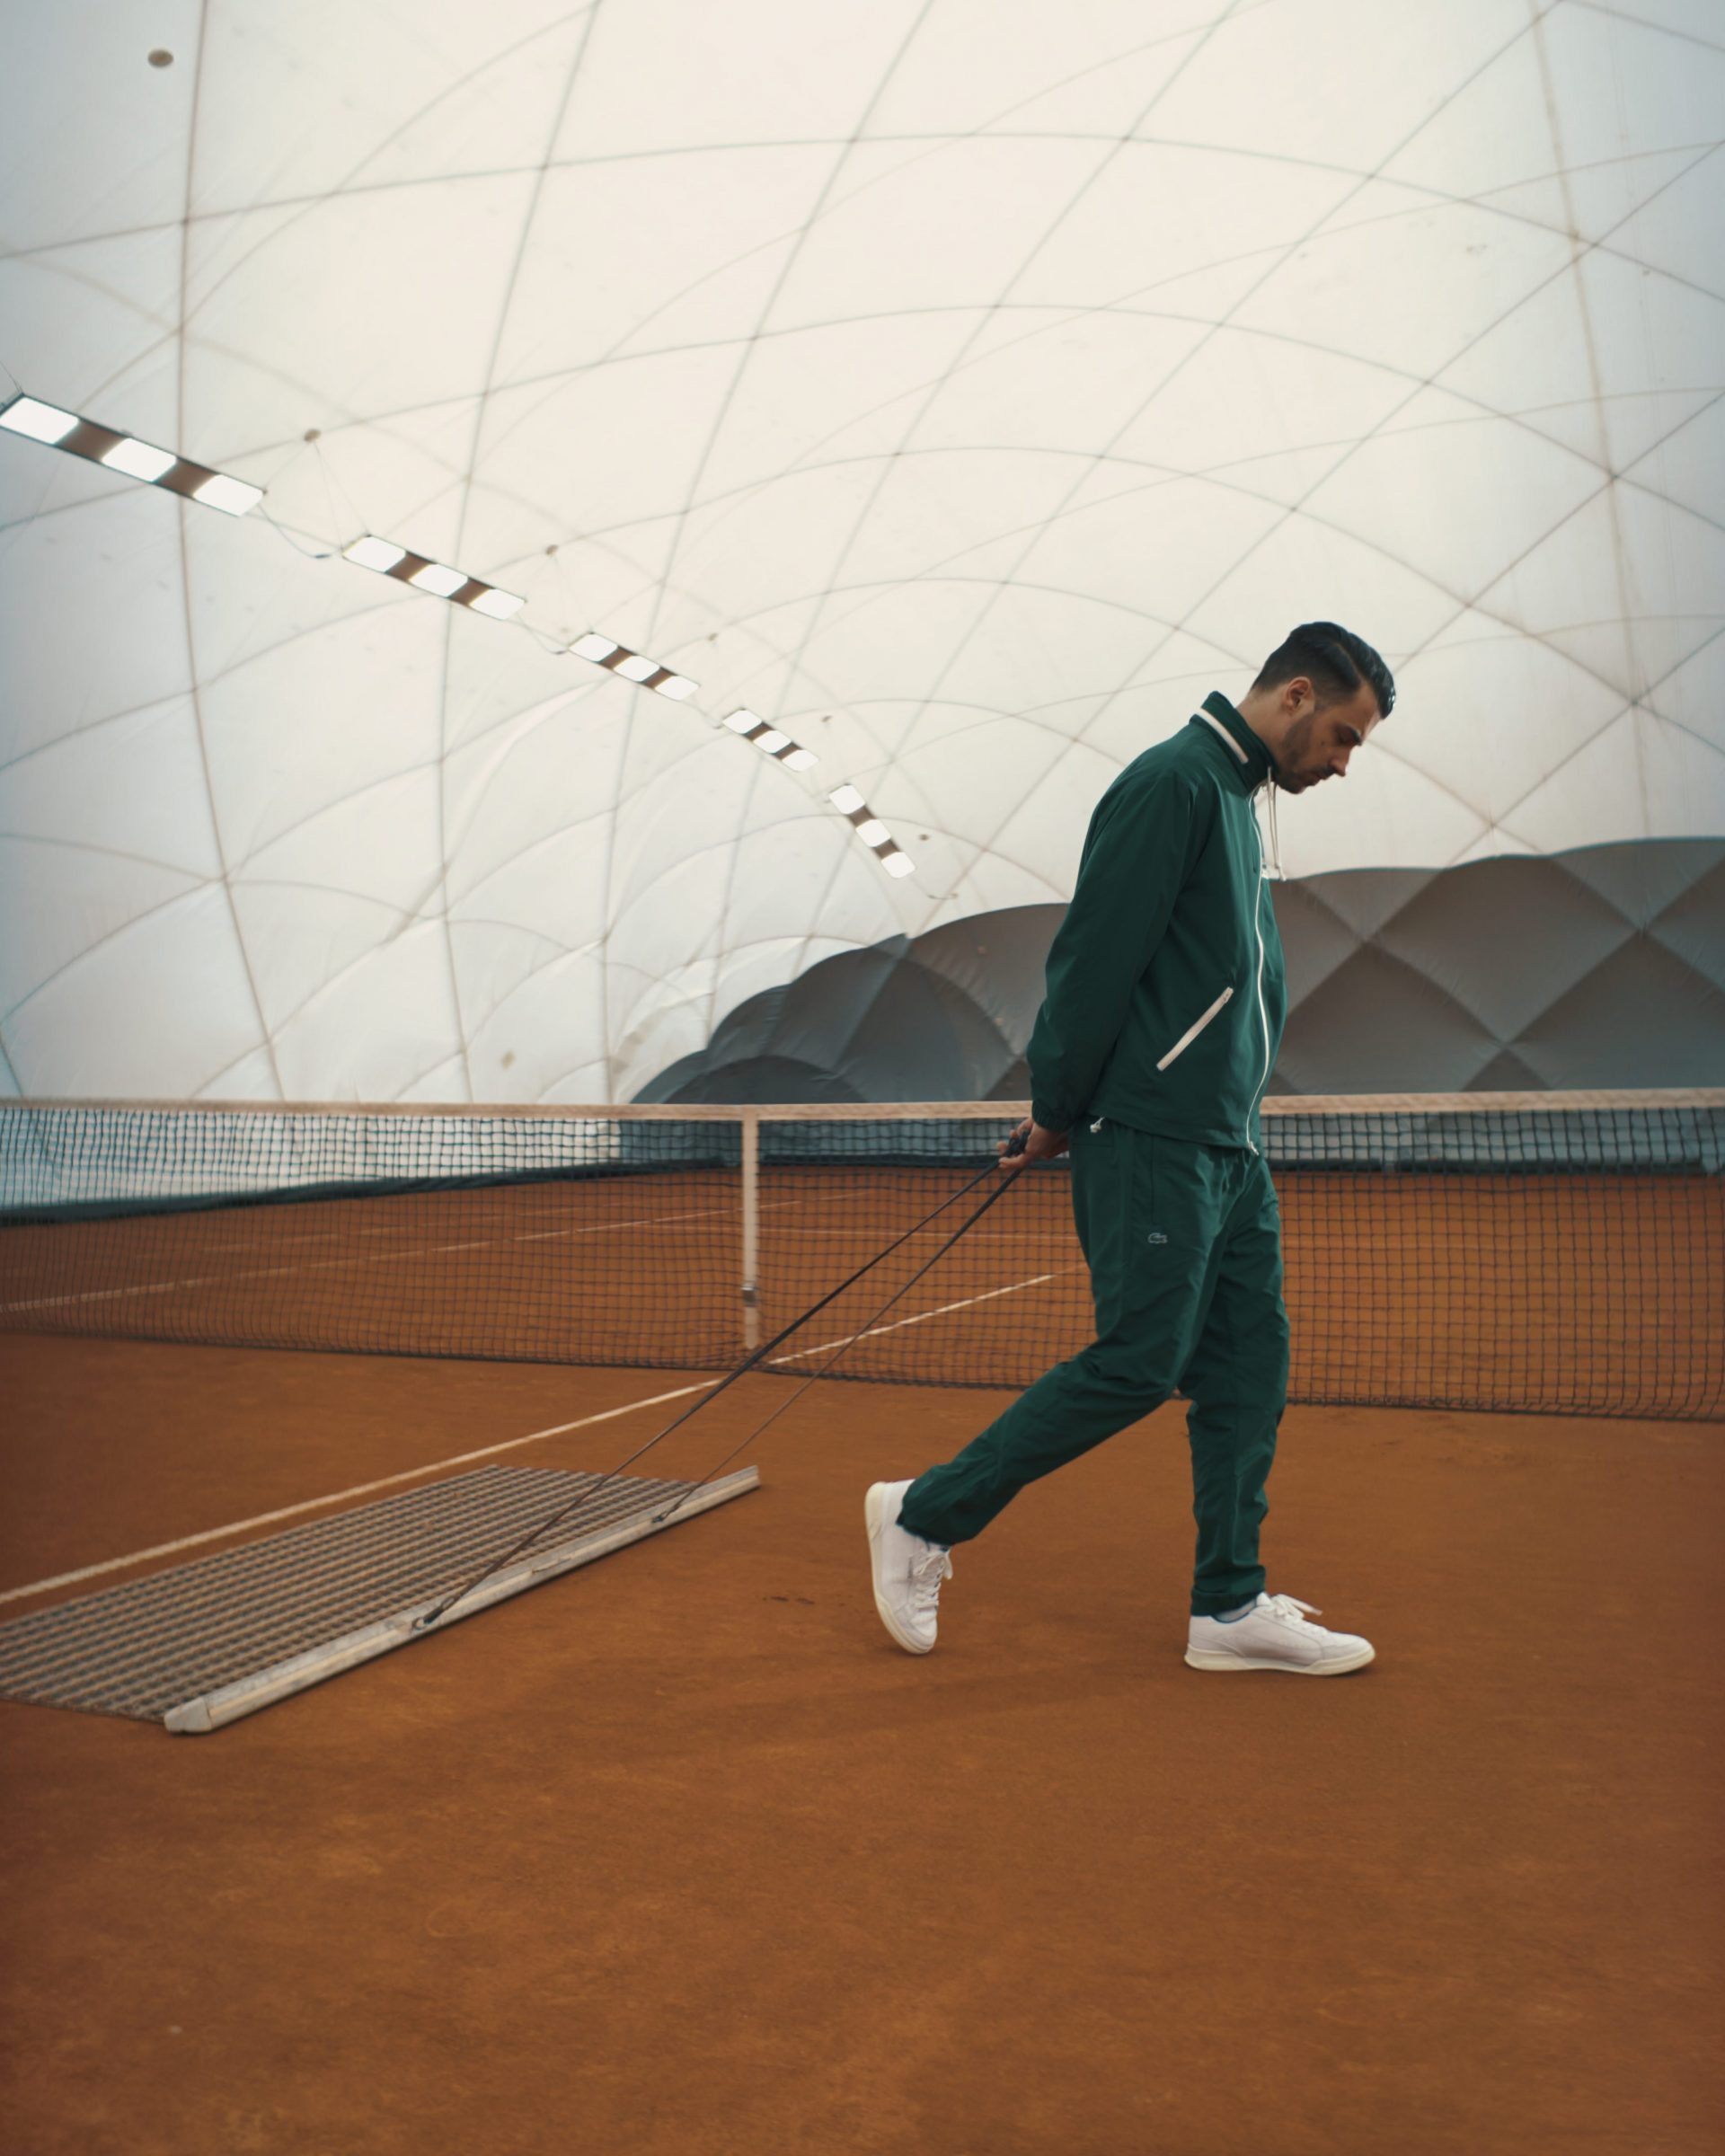 Lacoste Twin Serve Luxe & Game Advance Luxe - solebox Blog